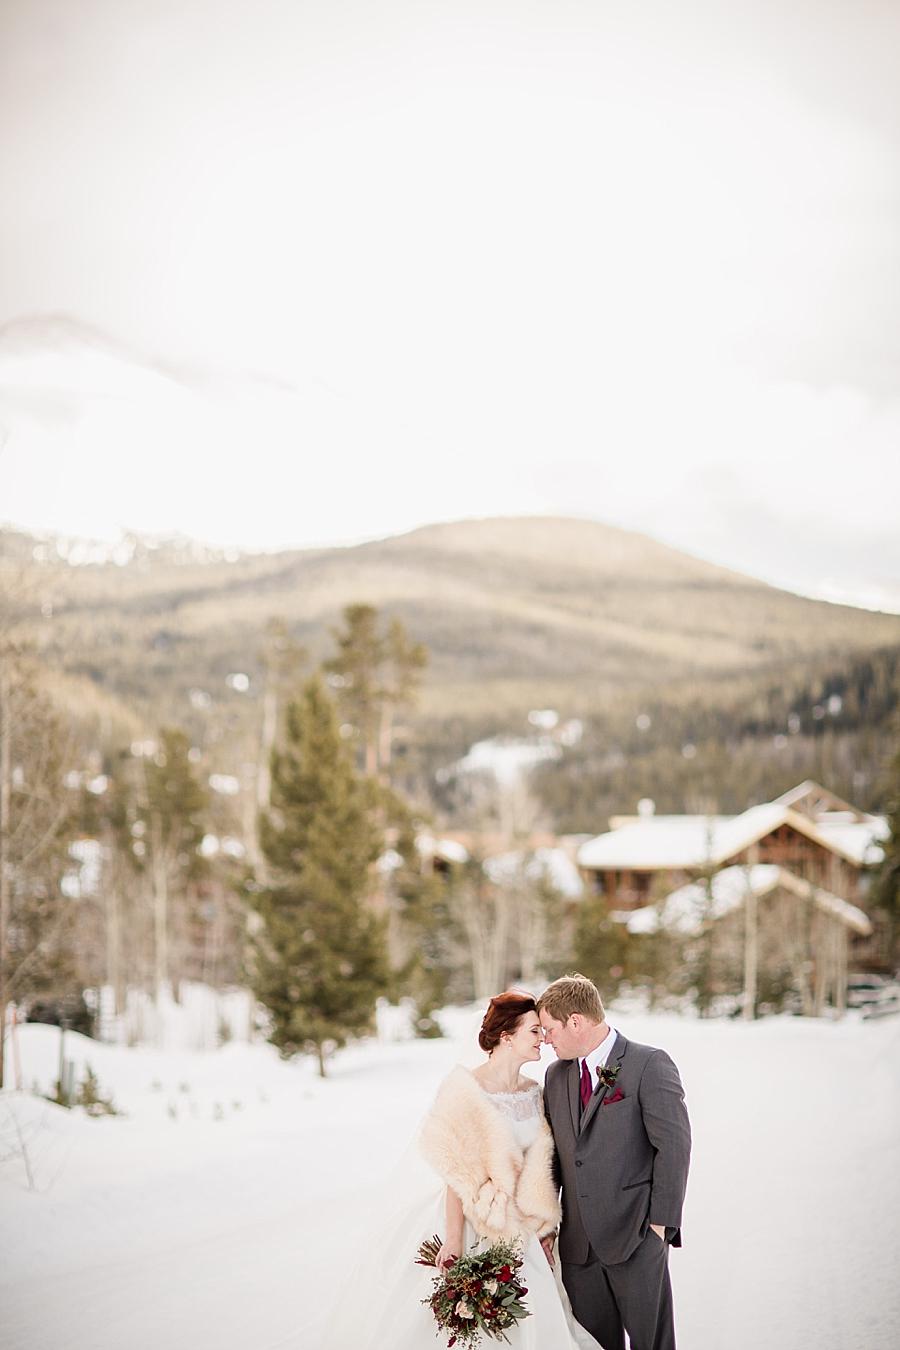 Foreheads together at this Colorado Destination Wedding by Knoxville Wedding Photographer, Amanda May Photos.